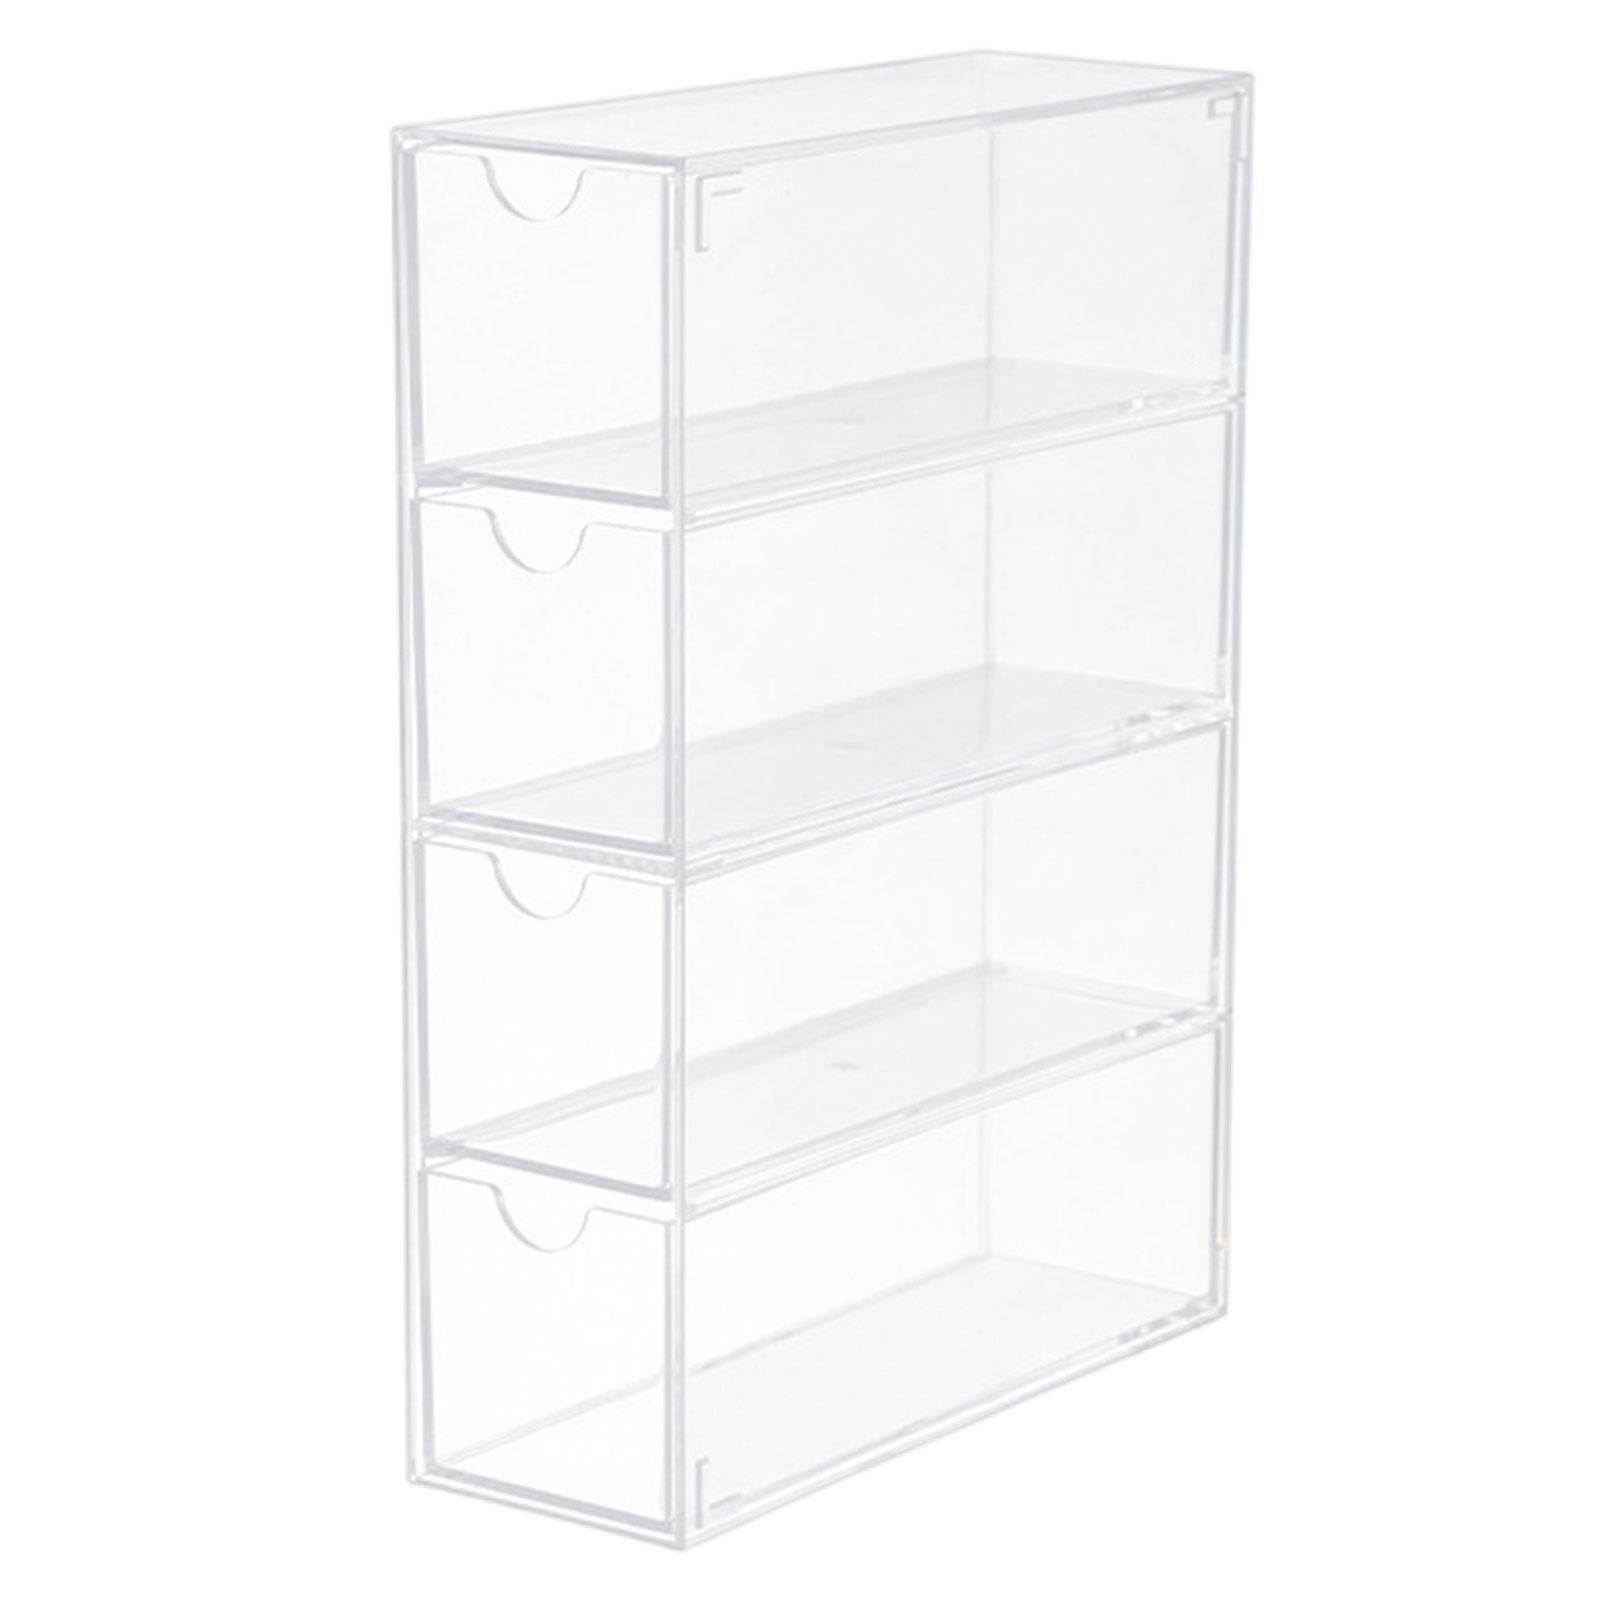 Makeup Organizer Acrylic 4 Drawers Clear Display for Countertops Office Bathroom